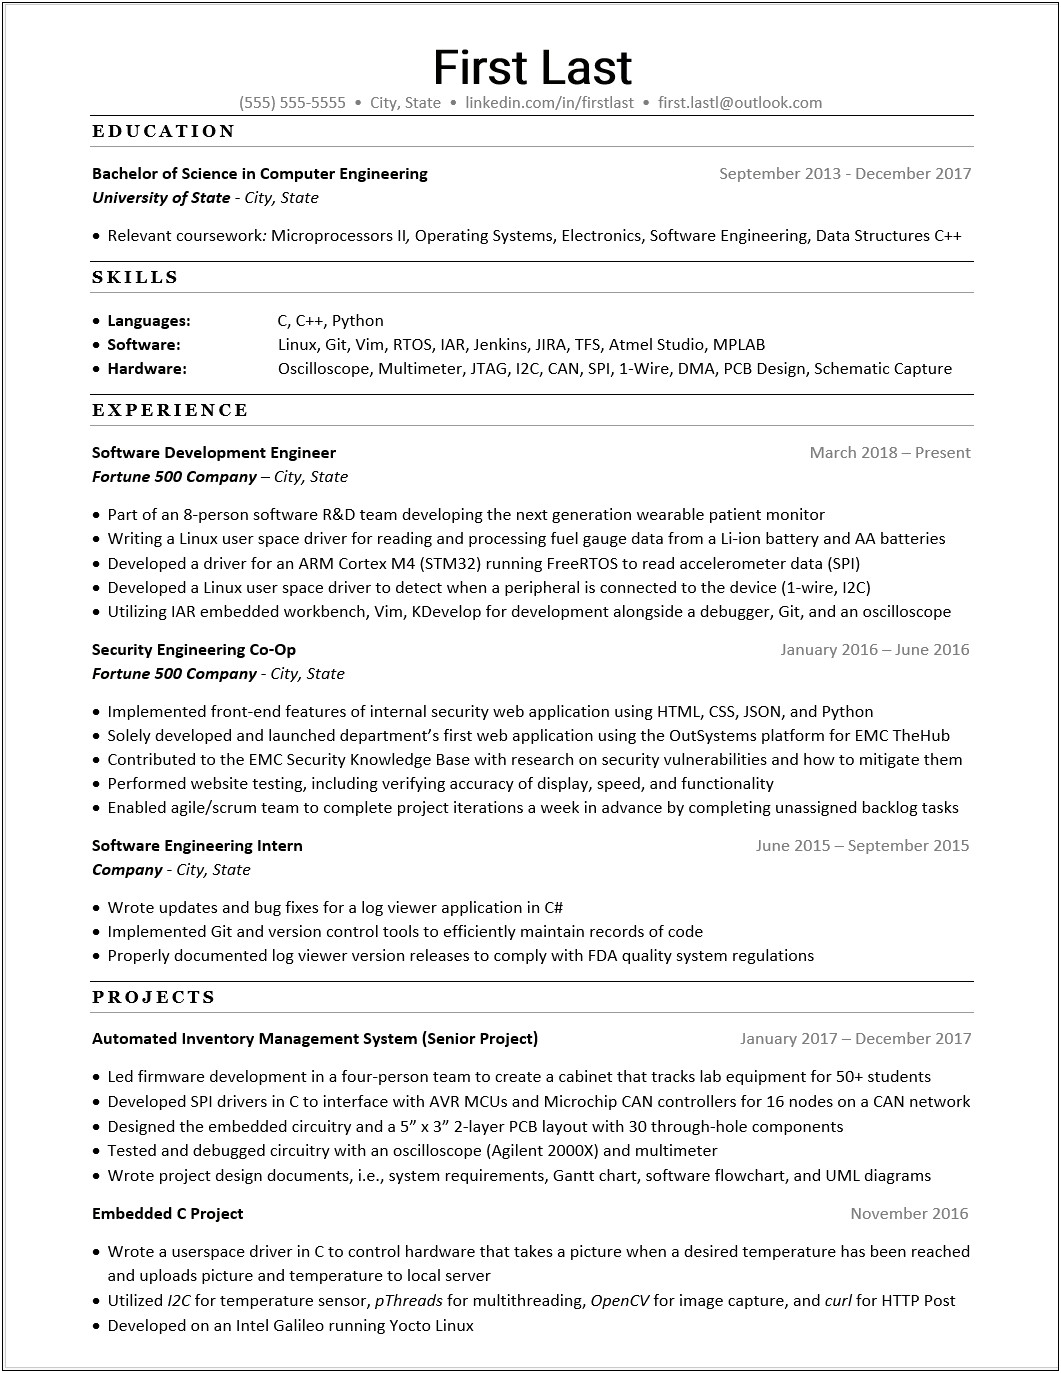 Iot Projects Good For Resume Reddit Ece